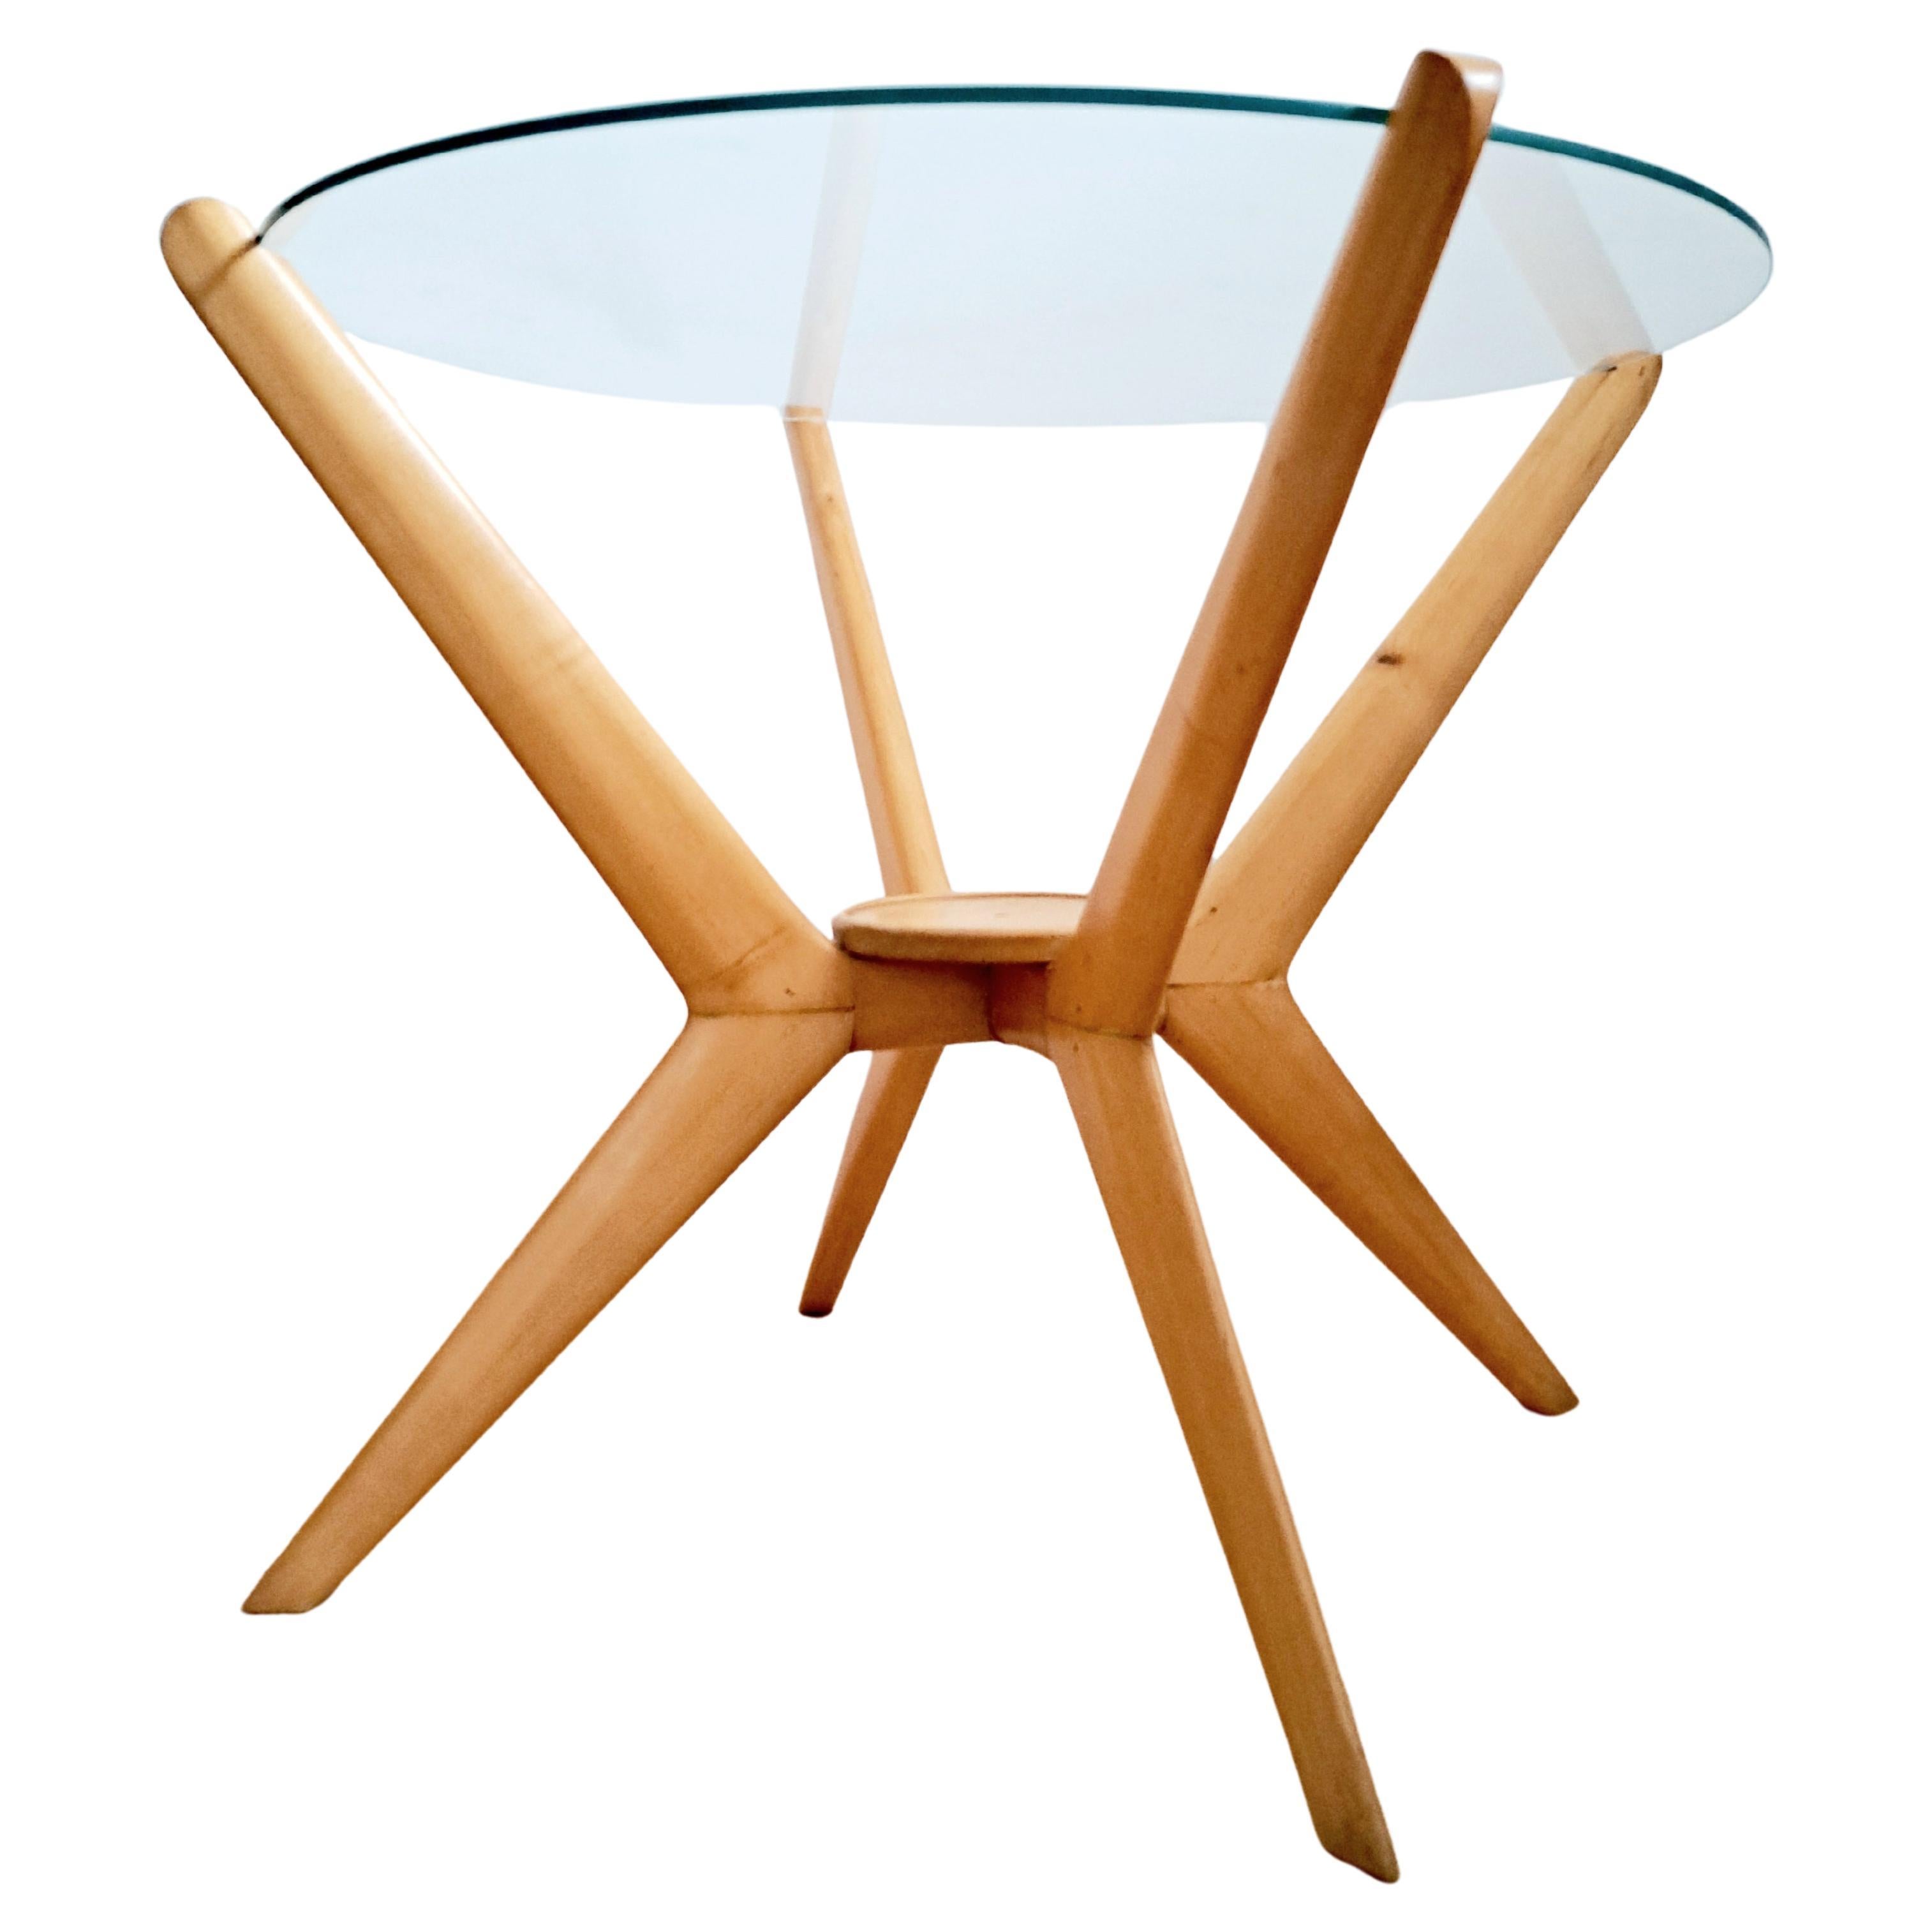 An elegant modernist coffee table/side table with lovely spider-type legs. 
Made of beech wood with a glass top. Made in Italy in the 1950s, by Calo di Carli. In good condition for age, with some slight scratches and cuffs on the wooden legs. New